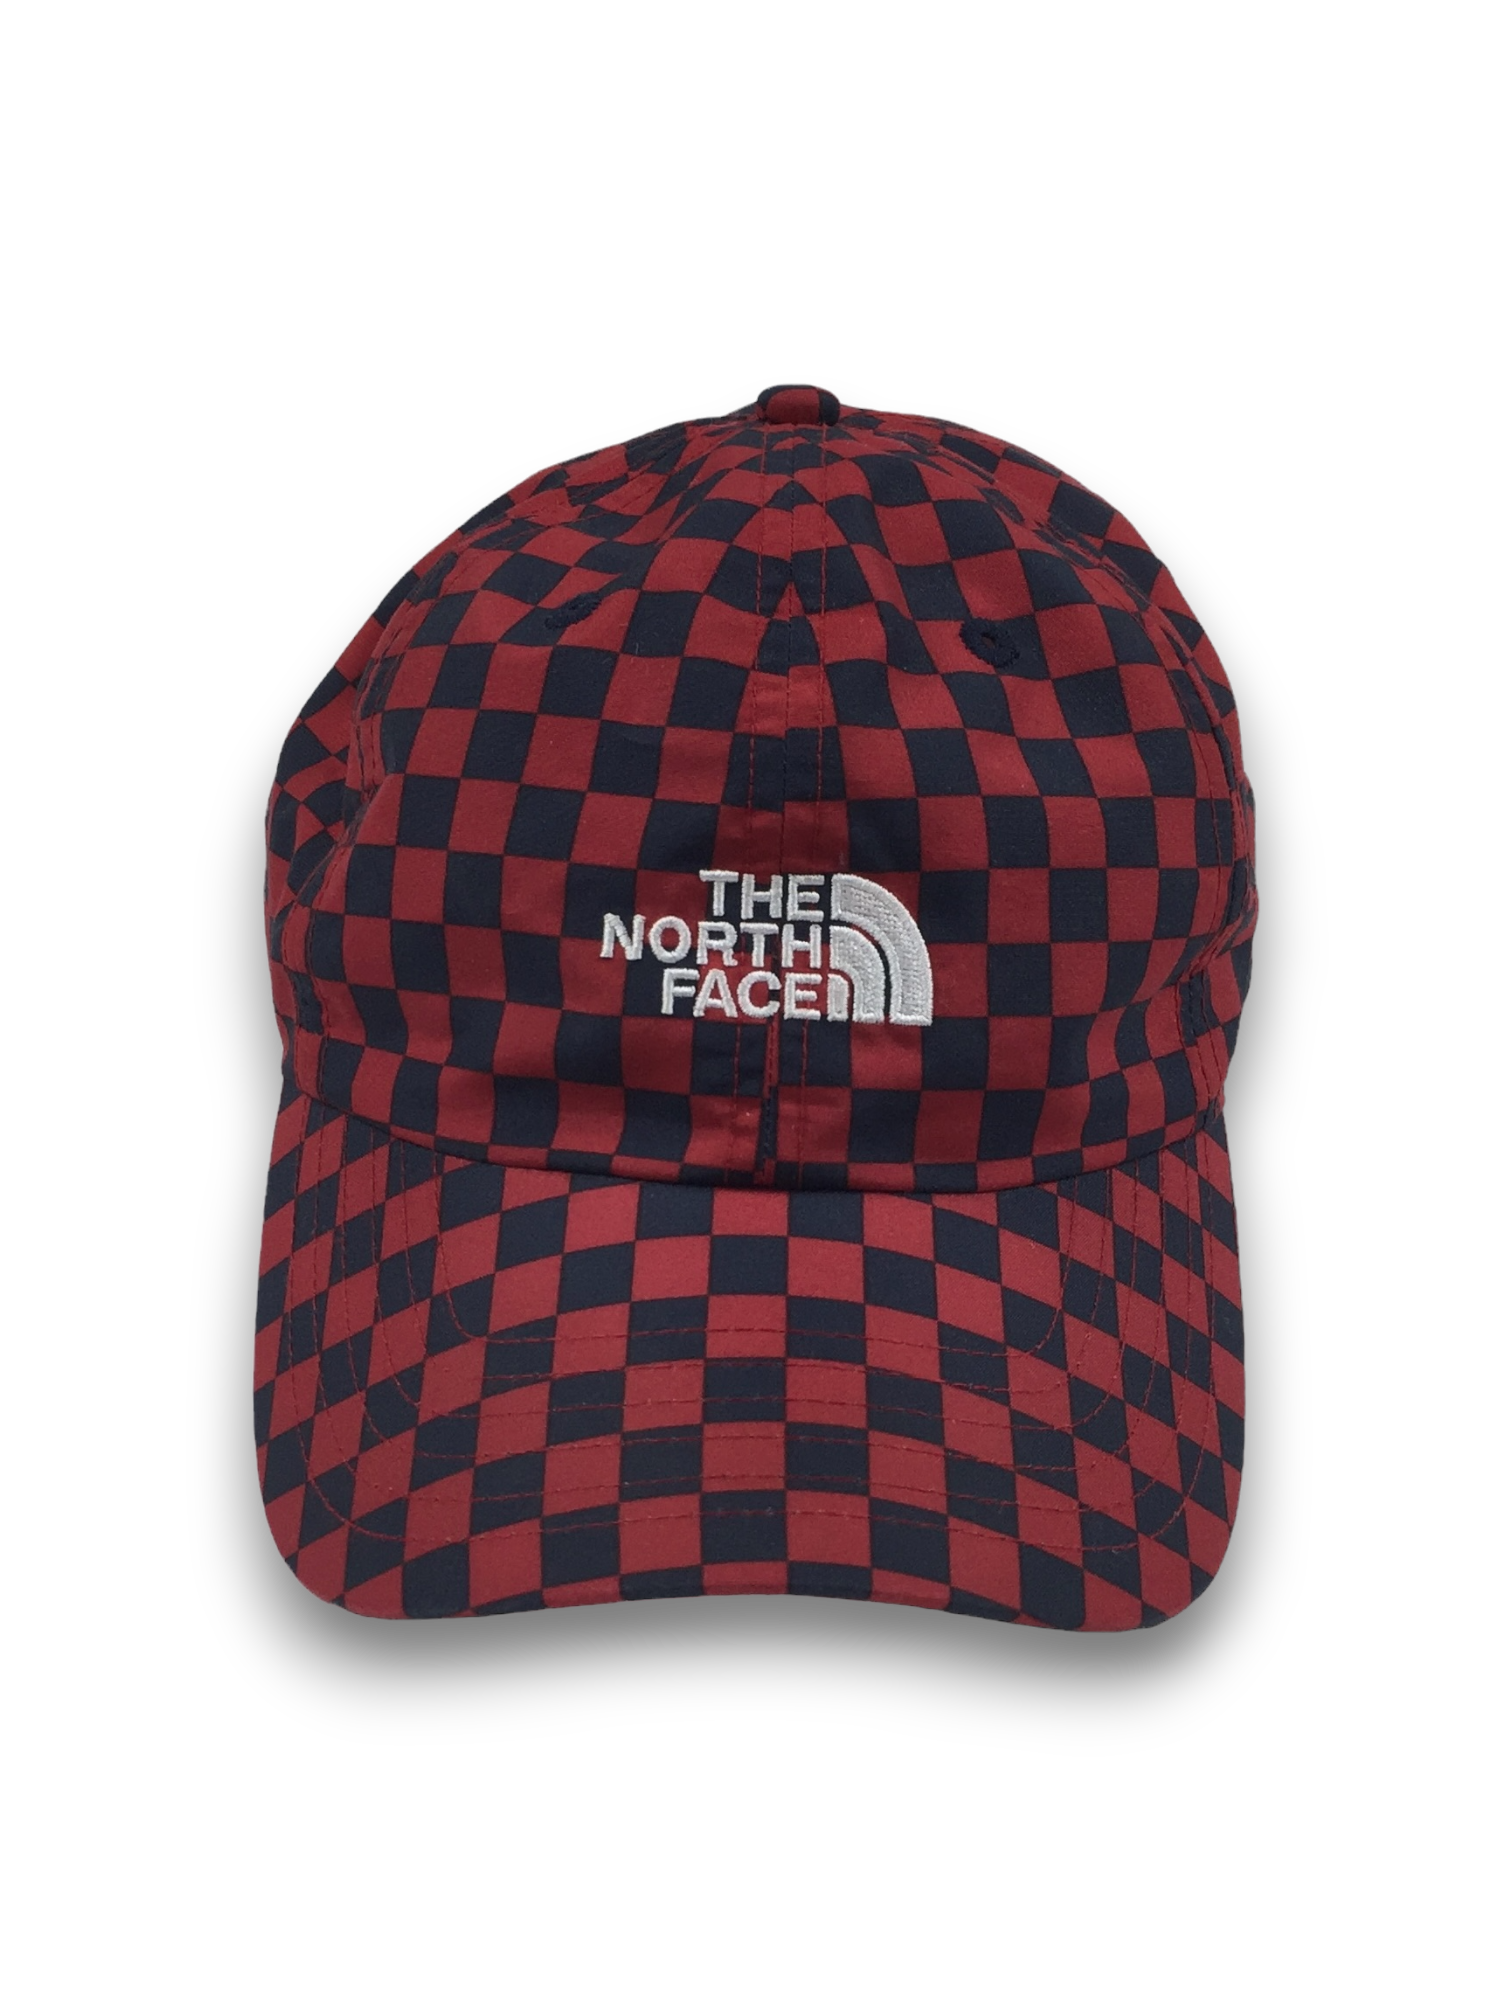 2011 Supreme x The North Face Checkered Red Cap